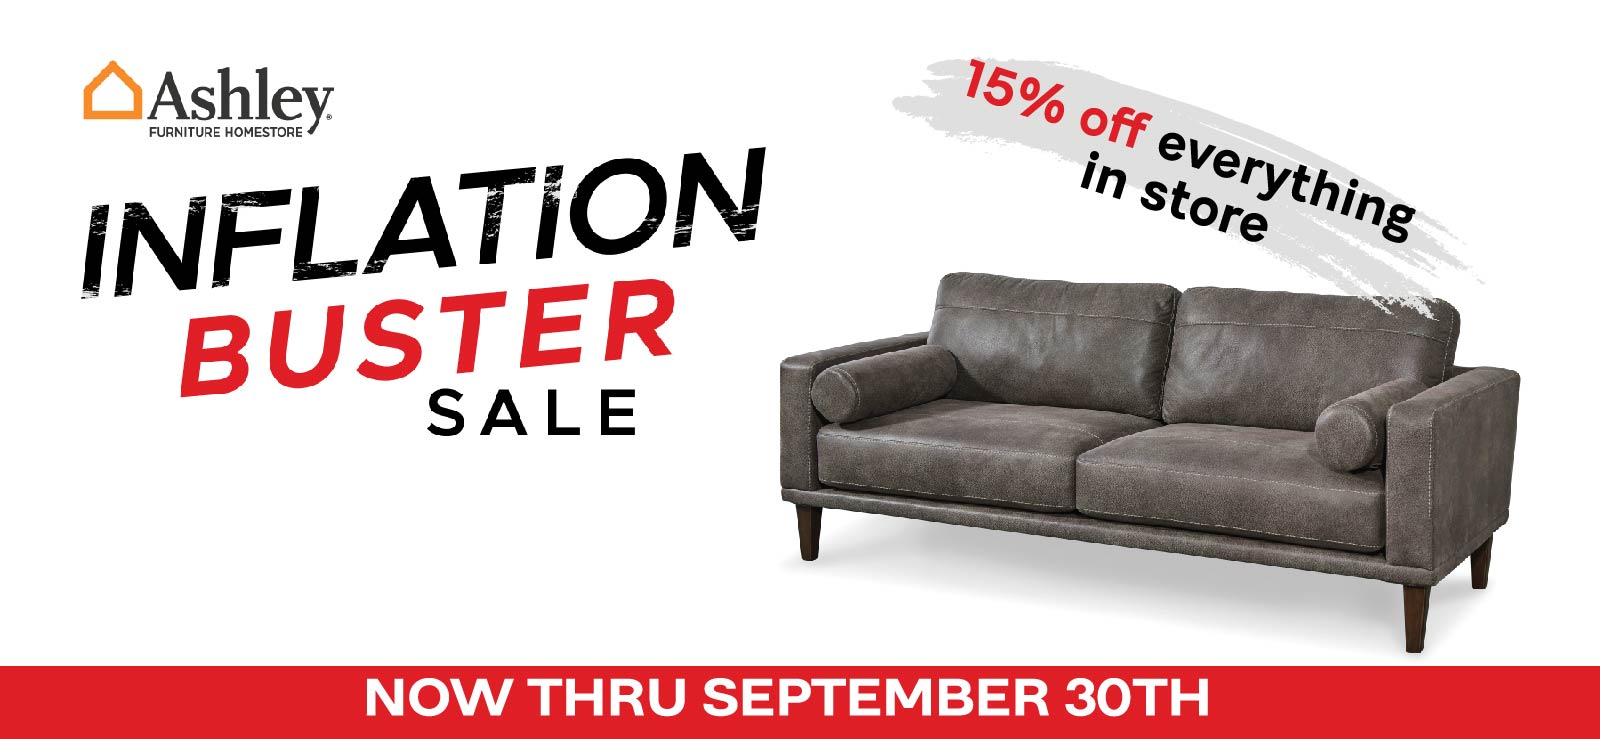 Inflation Buster Sale | 15% off everything in the store – now through september 30th